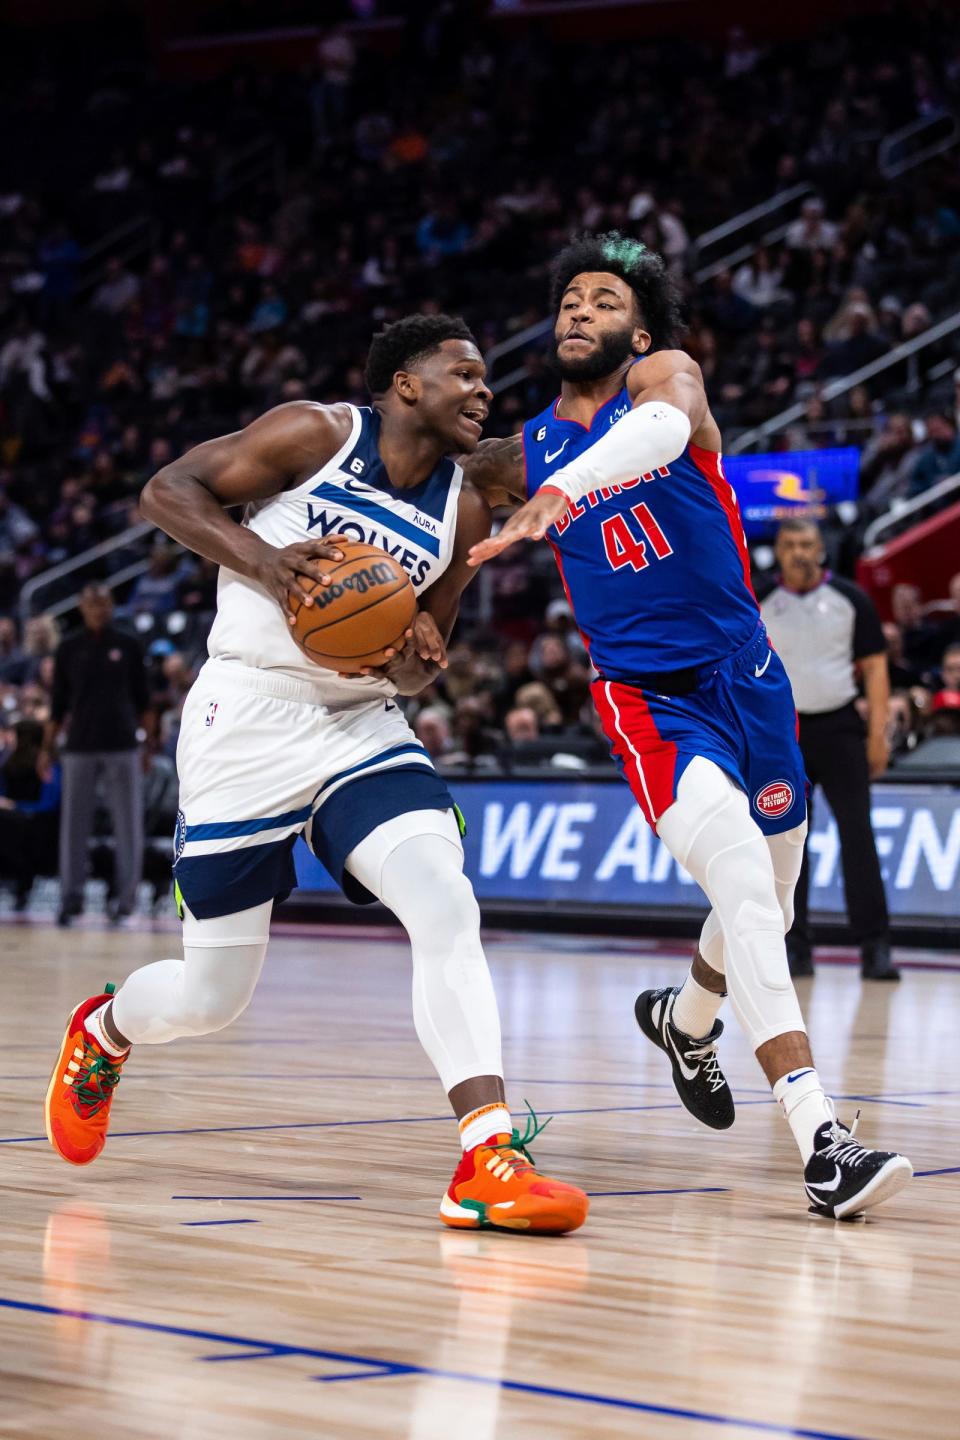 Minnesota Timberwolves guard Anthony Edwards drives to the basket against Detroit Pistons forward Saddiq Bey in the first quarter at Little Caesars Arena, Jan. 11, 2023.